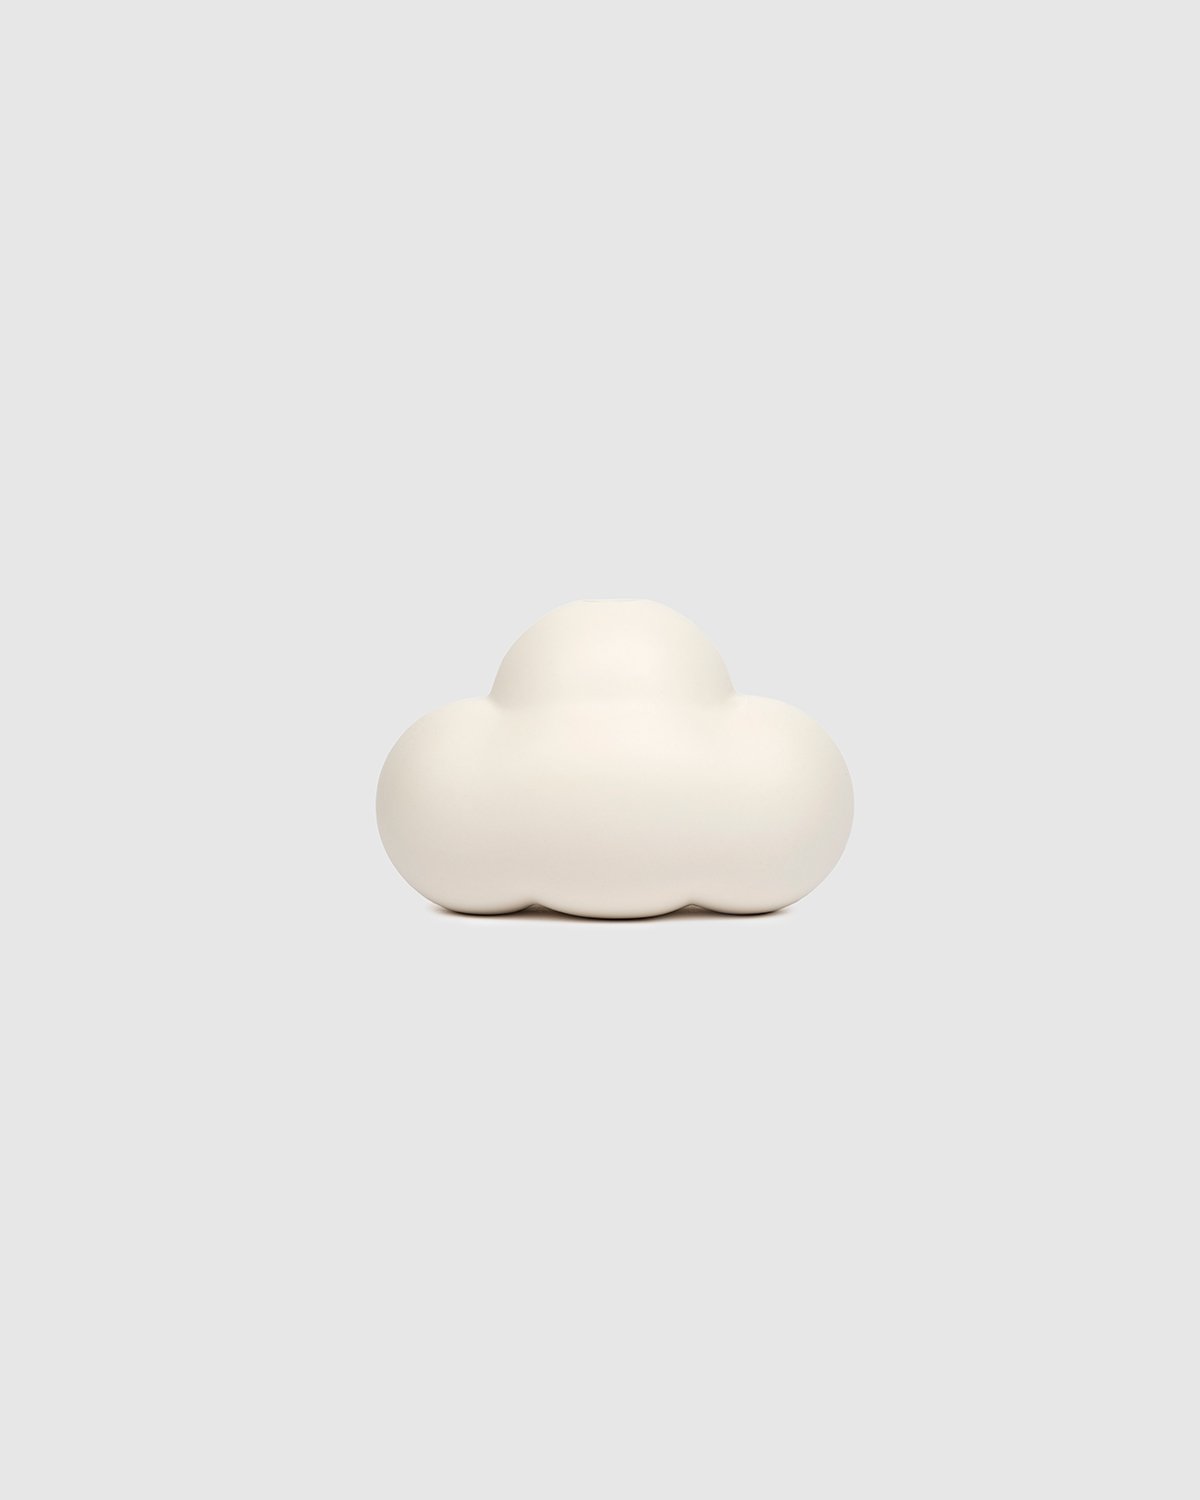 FriendsWithYou - Little Cloud Flower Vase by - Vases - White - Image 2